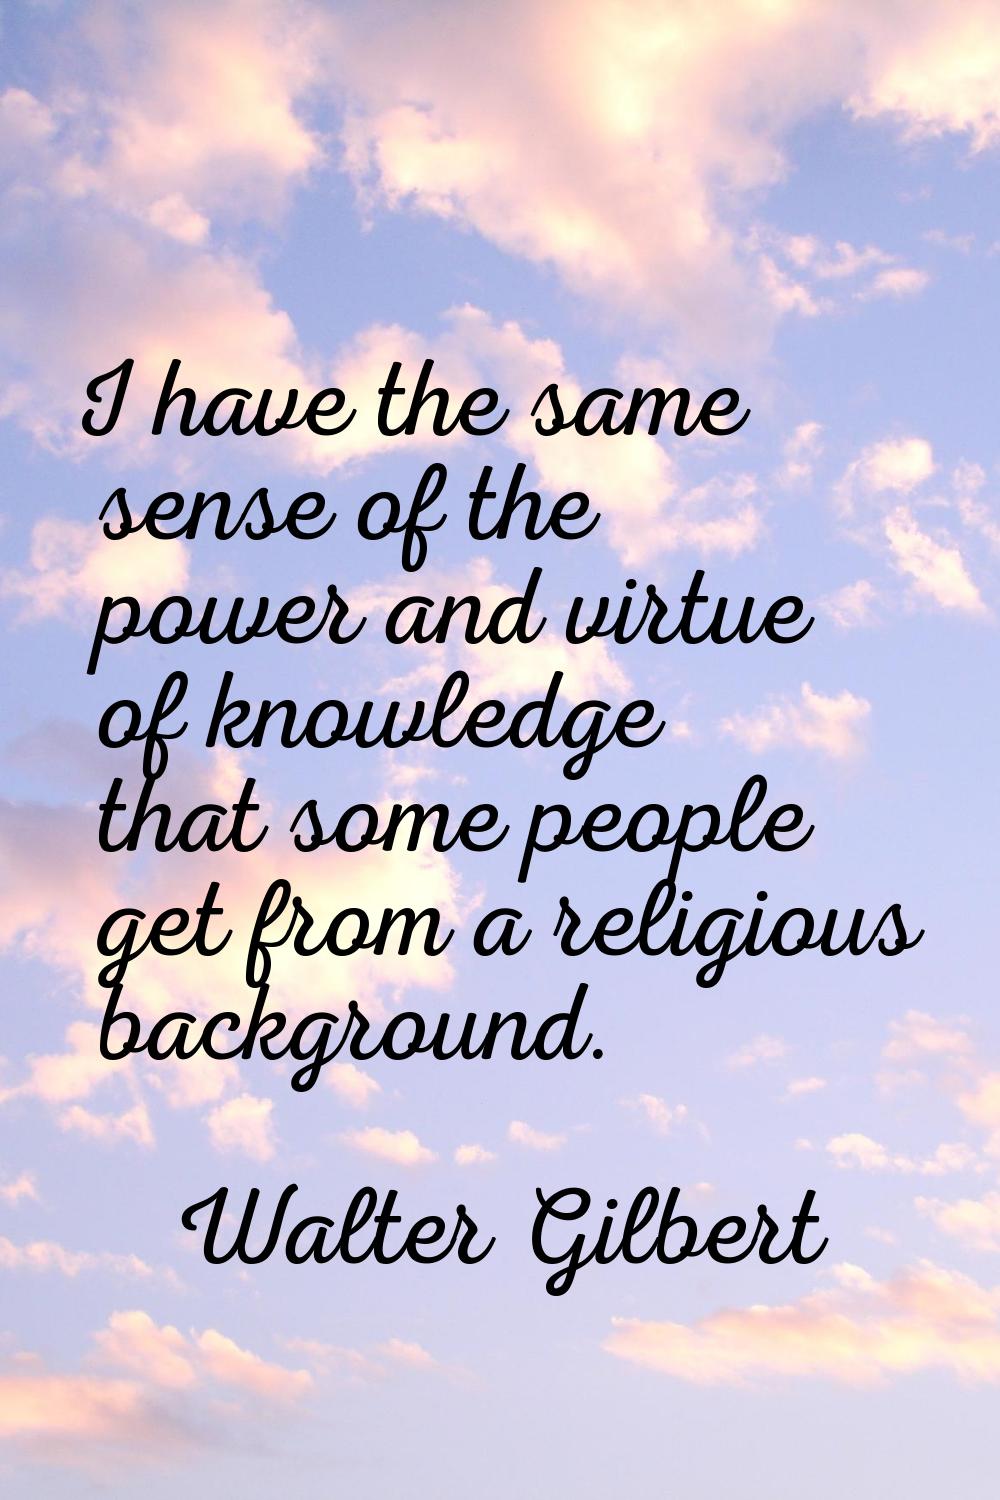 I have the same sense of the power and virtue of knowledge that some people get from a religious ba